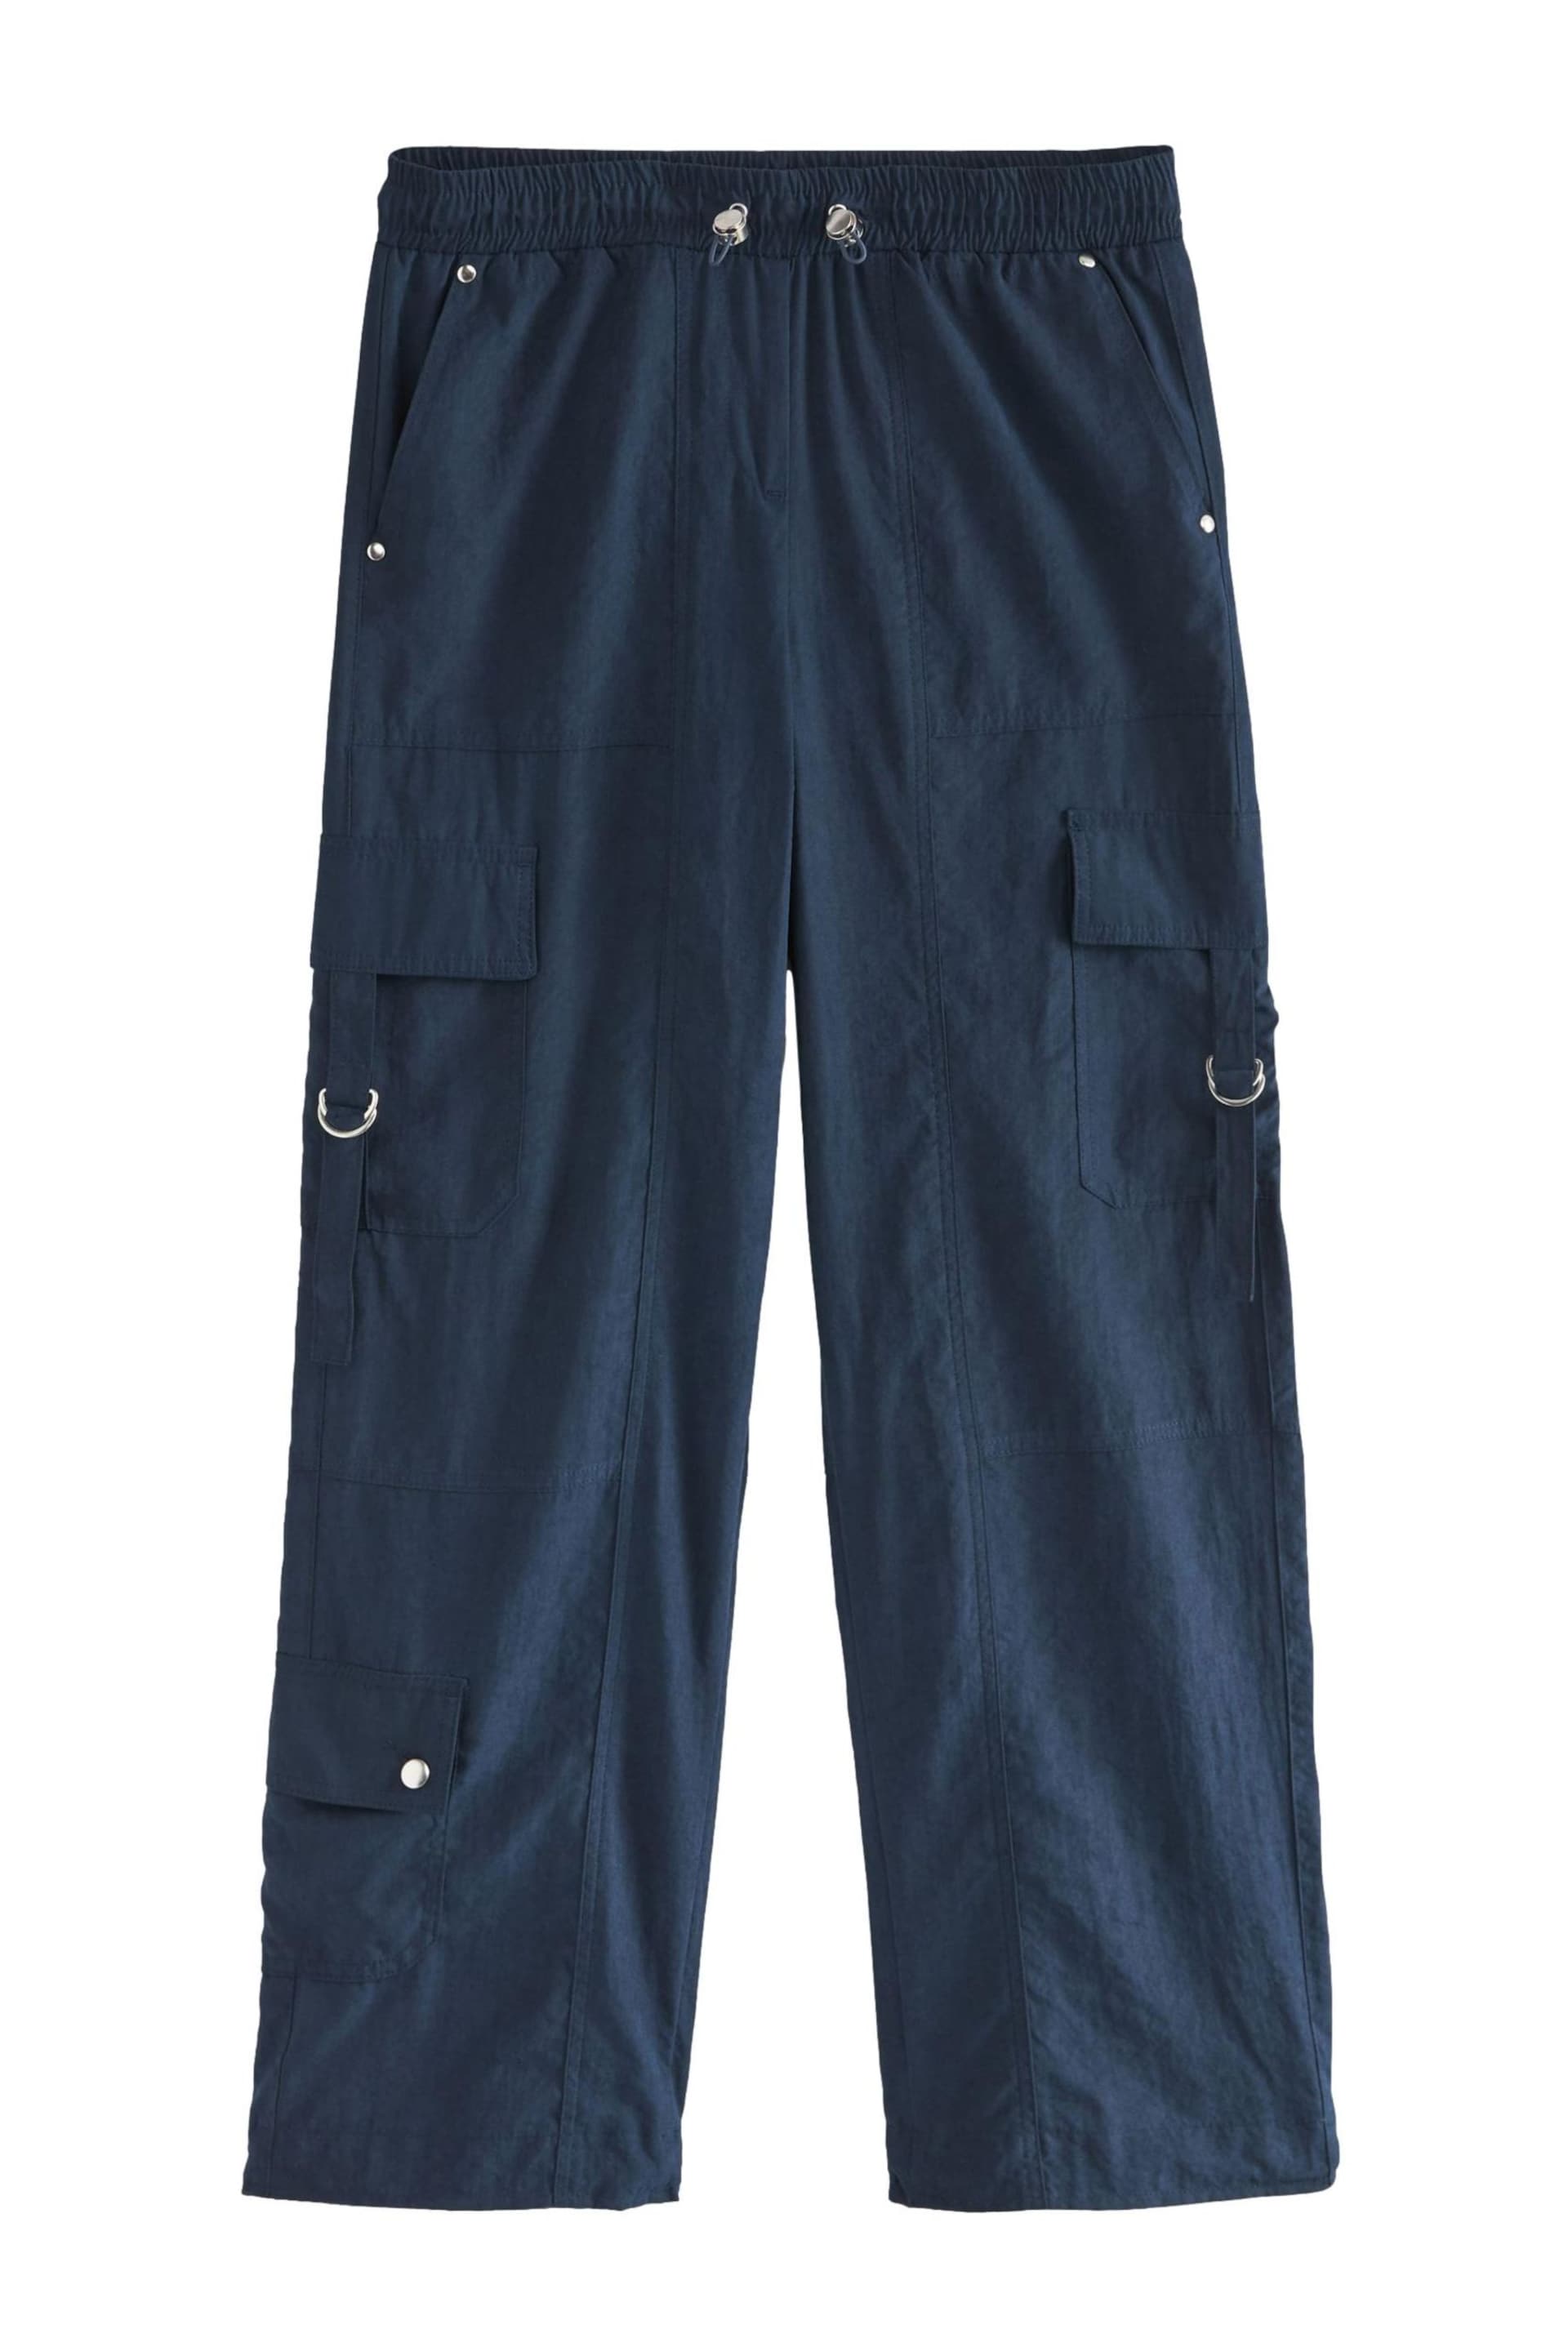 Navy Blue Lightweight Cargo Trousers - Image 6 of 7